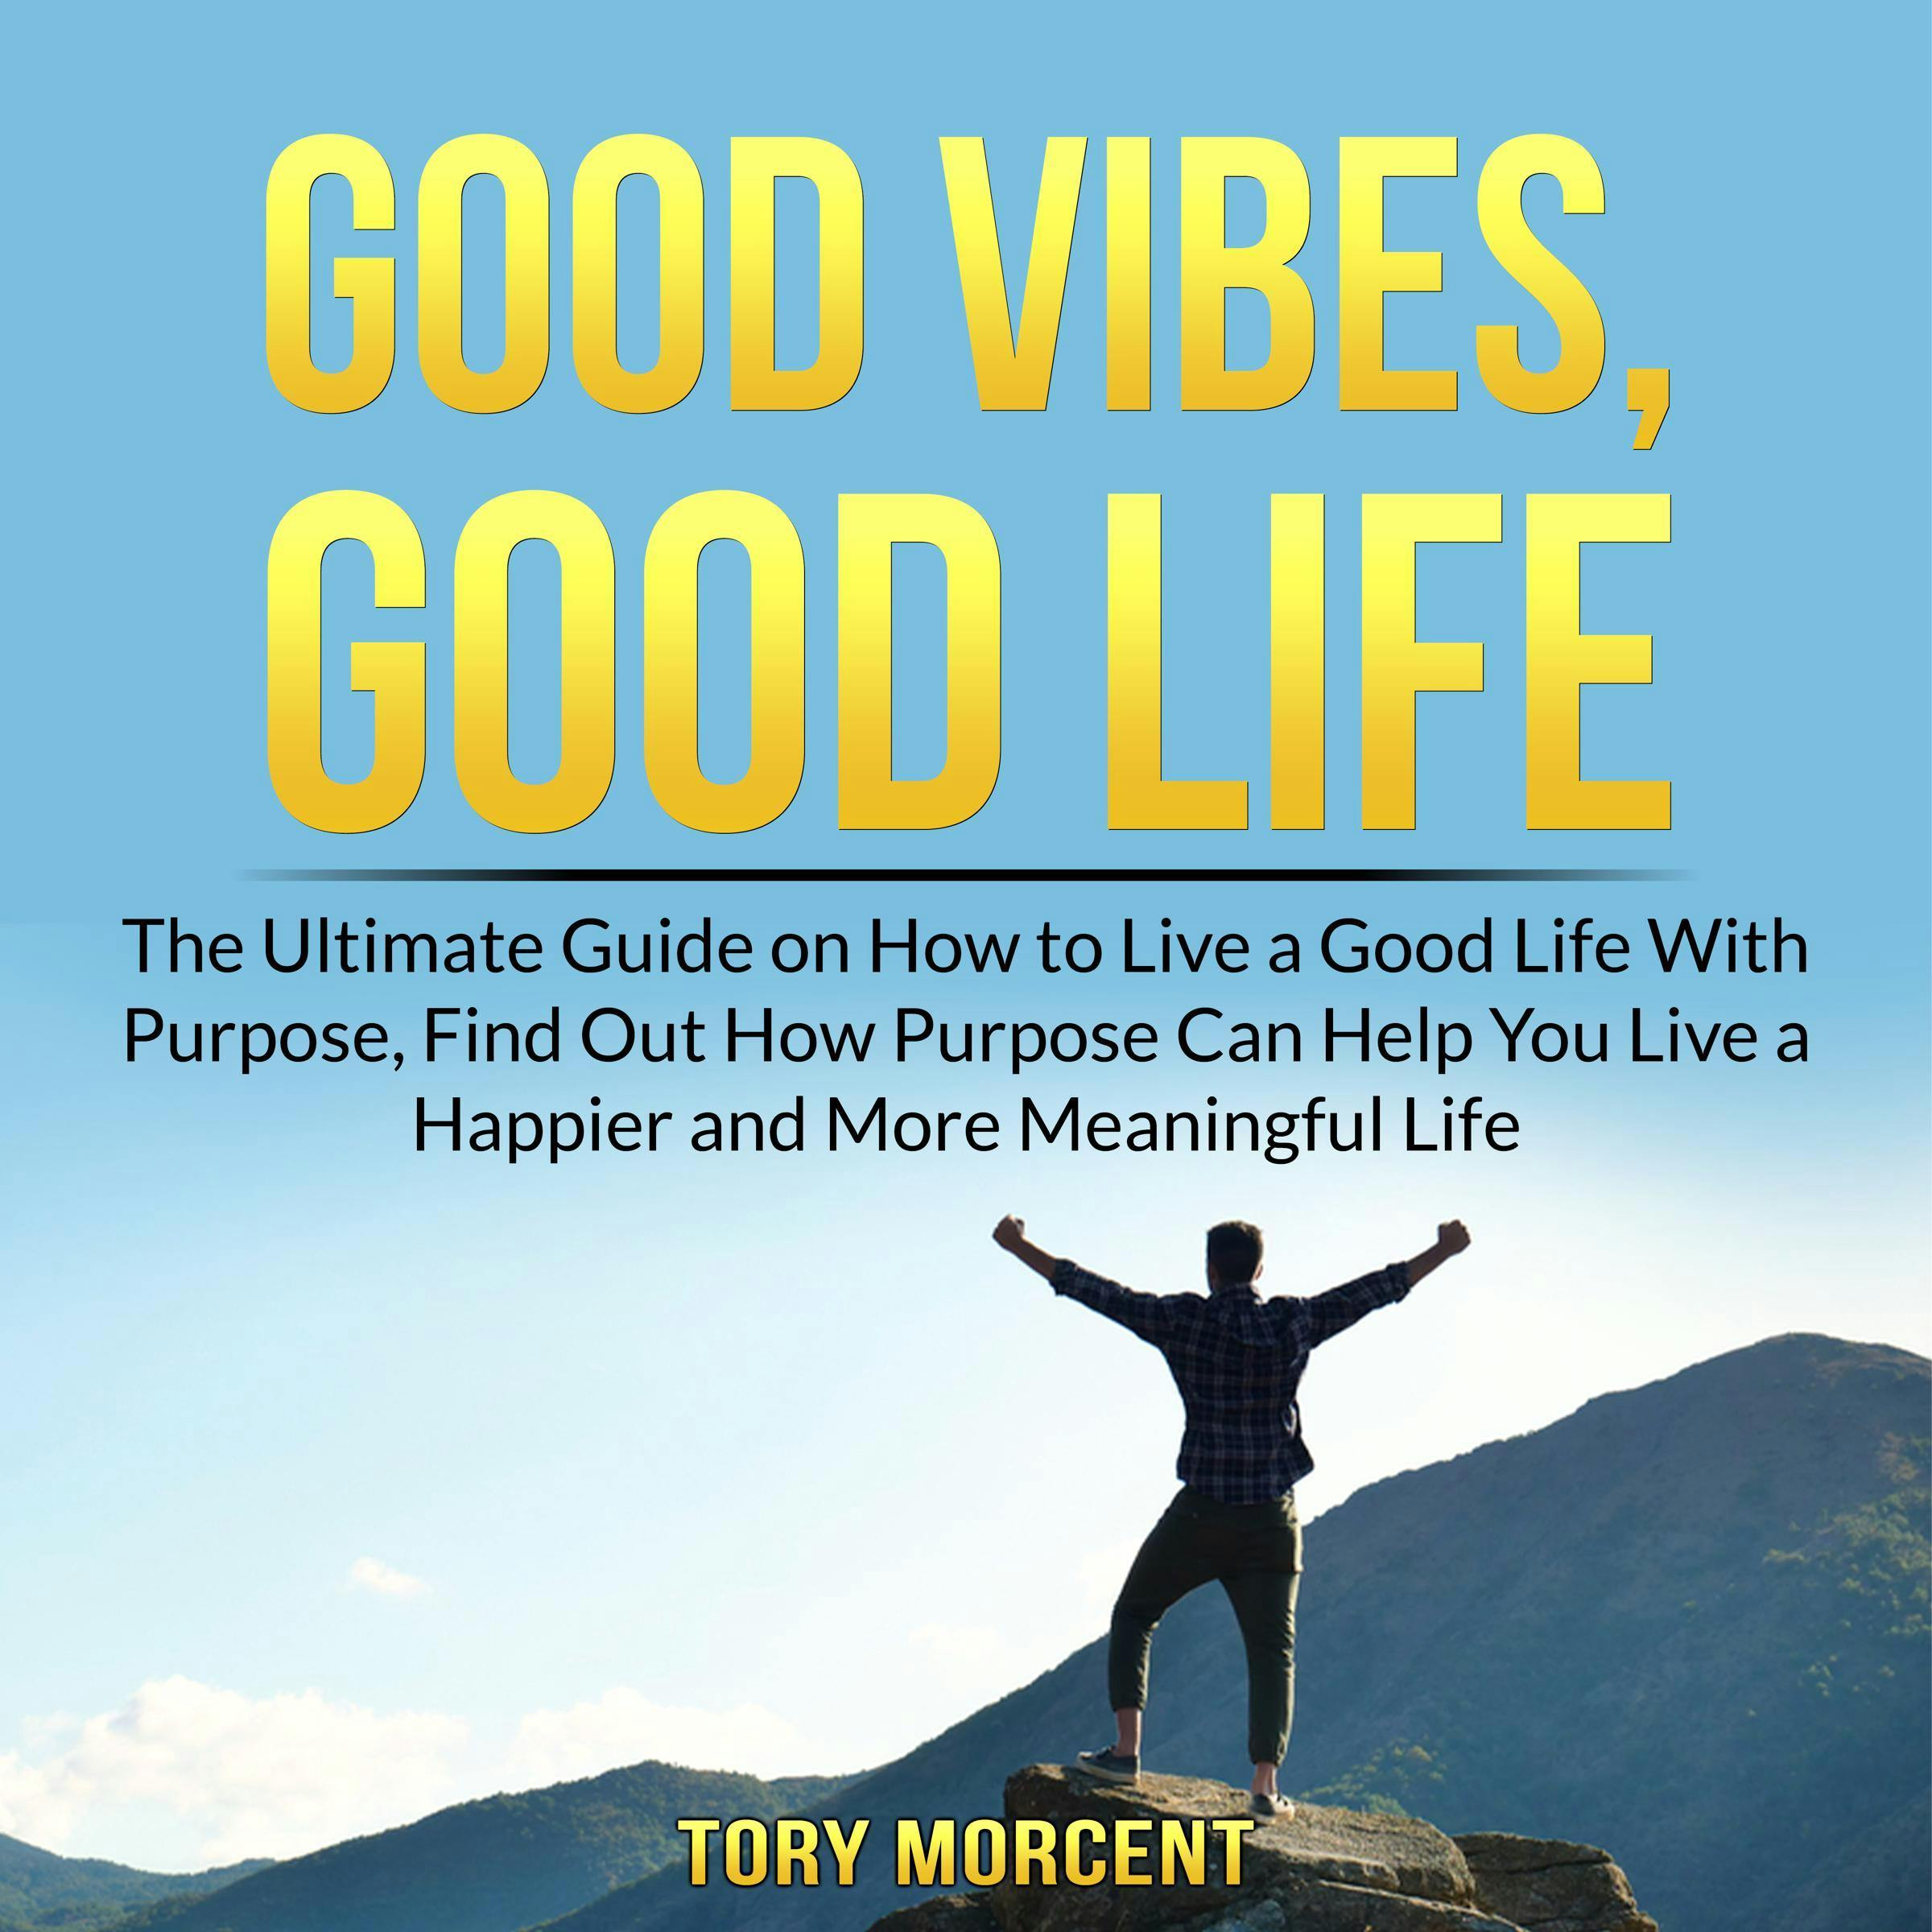 Good Vibes, Good Life: The Ultimate Guide on How to Live a Good Life With Purpose, Find Out How Purpose Can Help You Live a Happier and More Meaningful Life - undefined